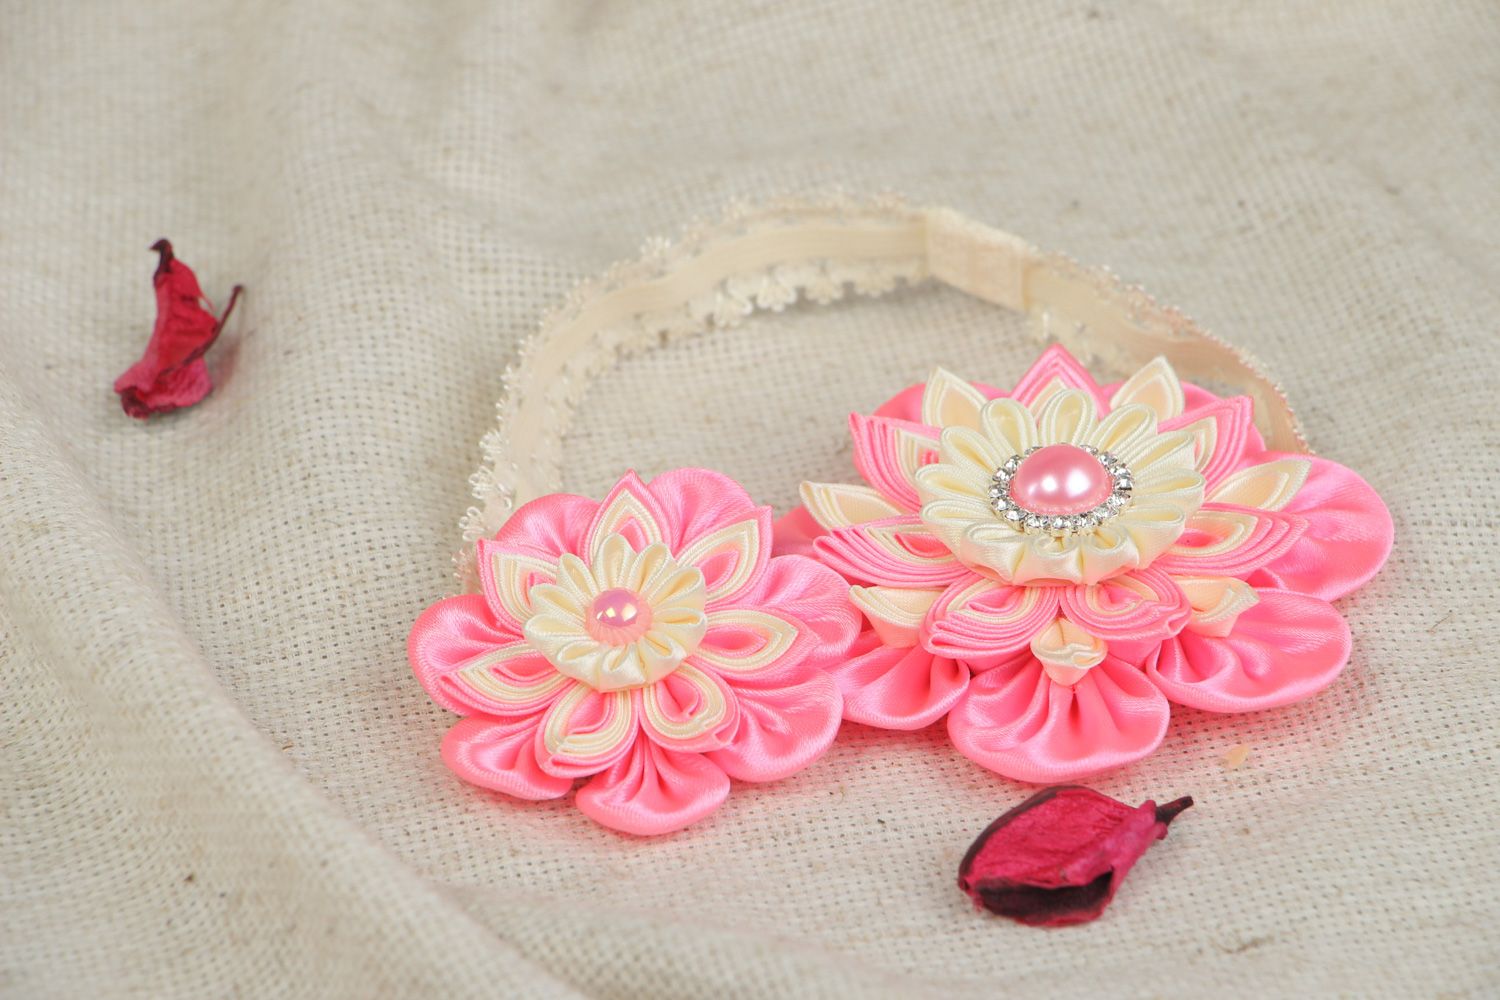 Handmade designer headband with satin ribbon flower in pink and cream colors photo 5